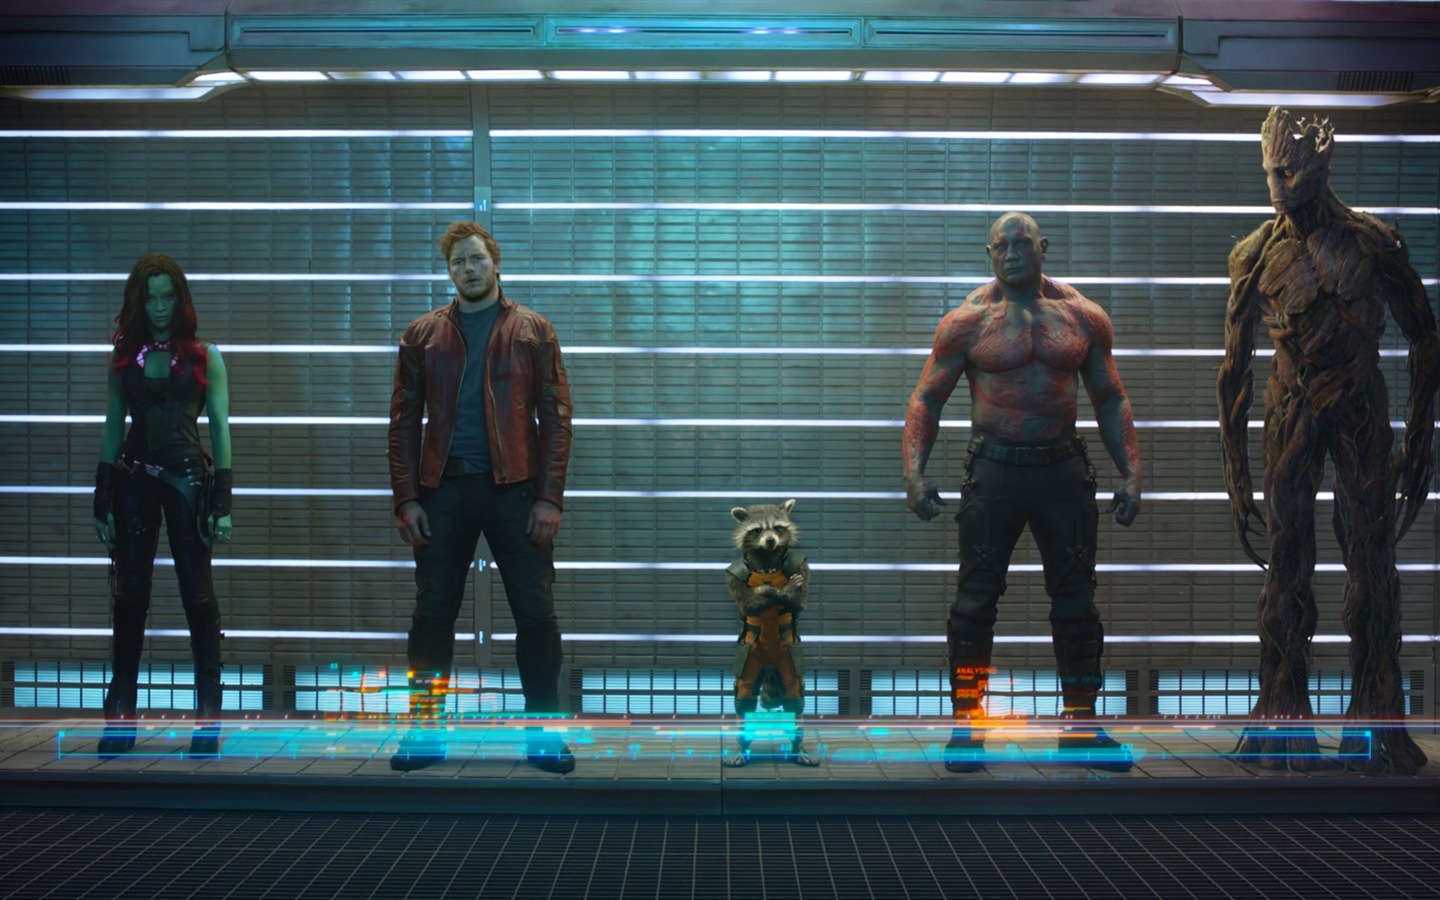 Guardians of the Galaxy 2014 HD movie wallpapers #5 - 1440x900